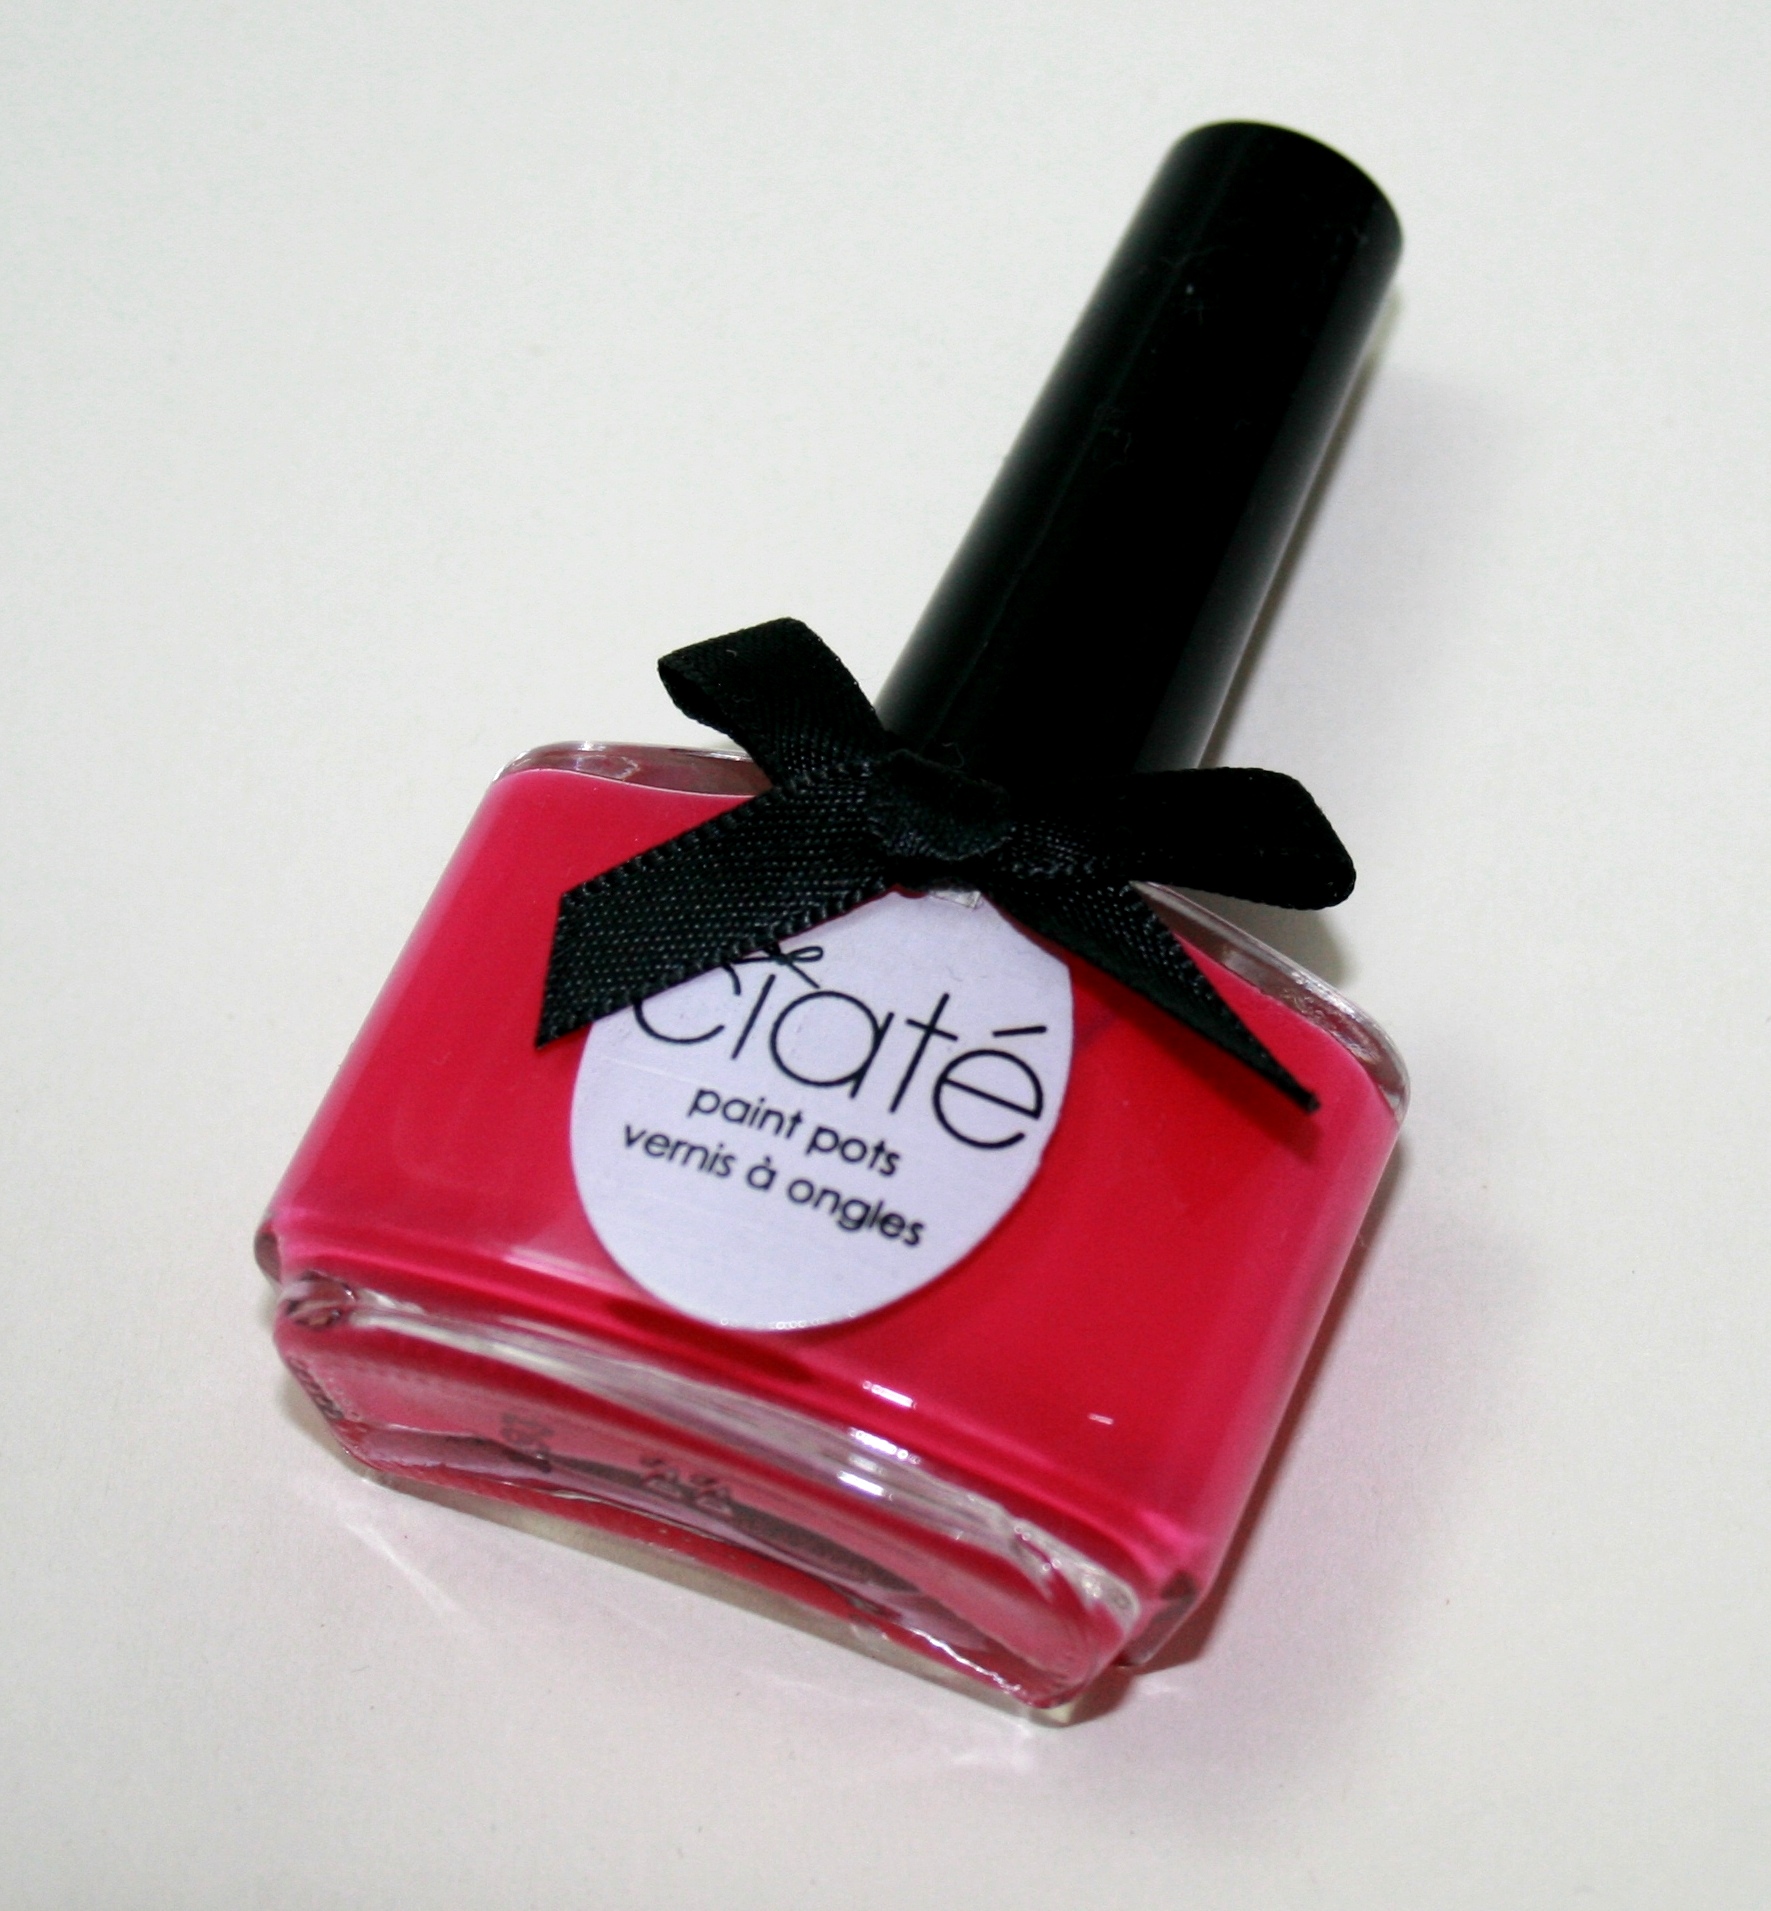 NOTD: Ciate Paint Pot in Raspberry Collins